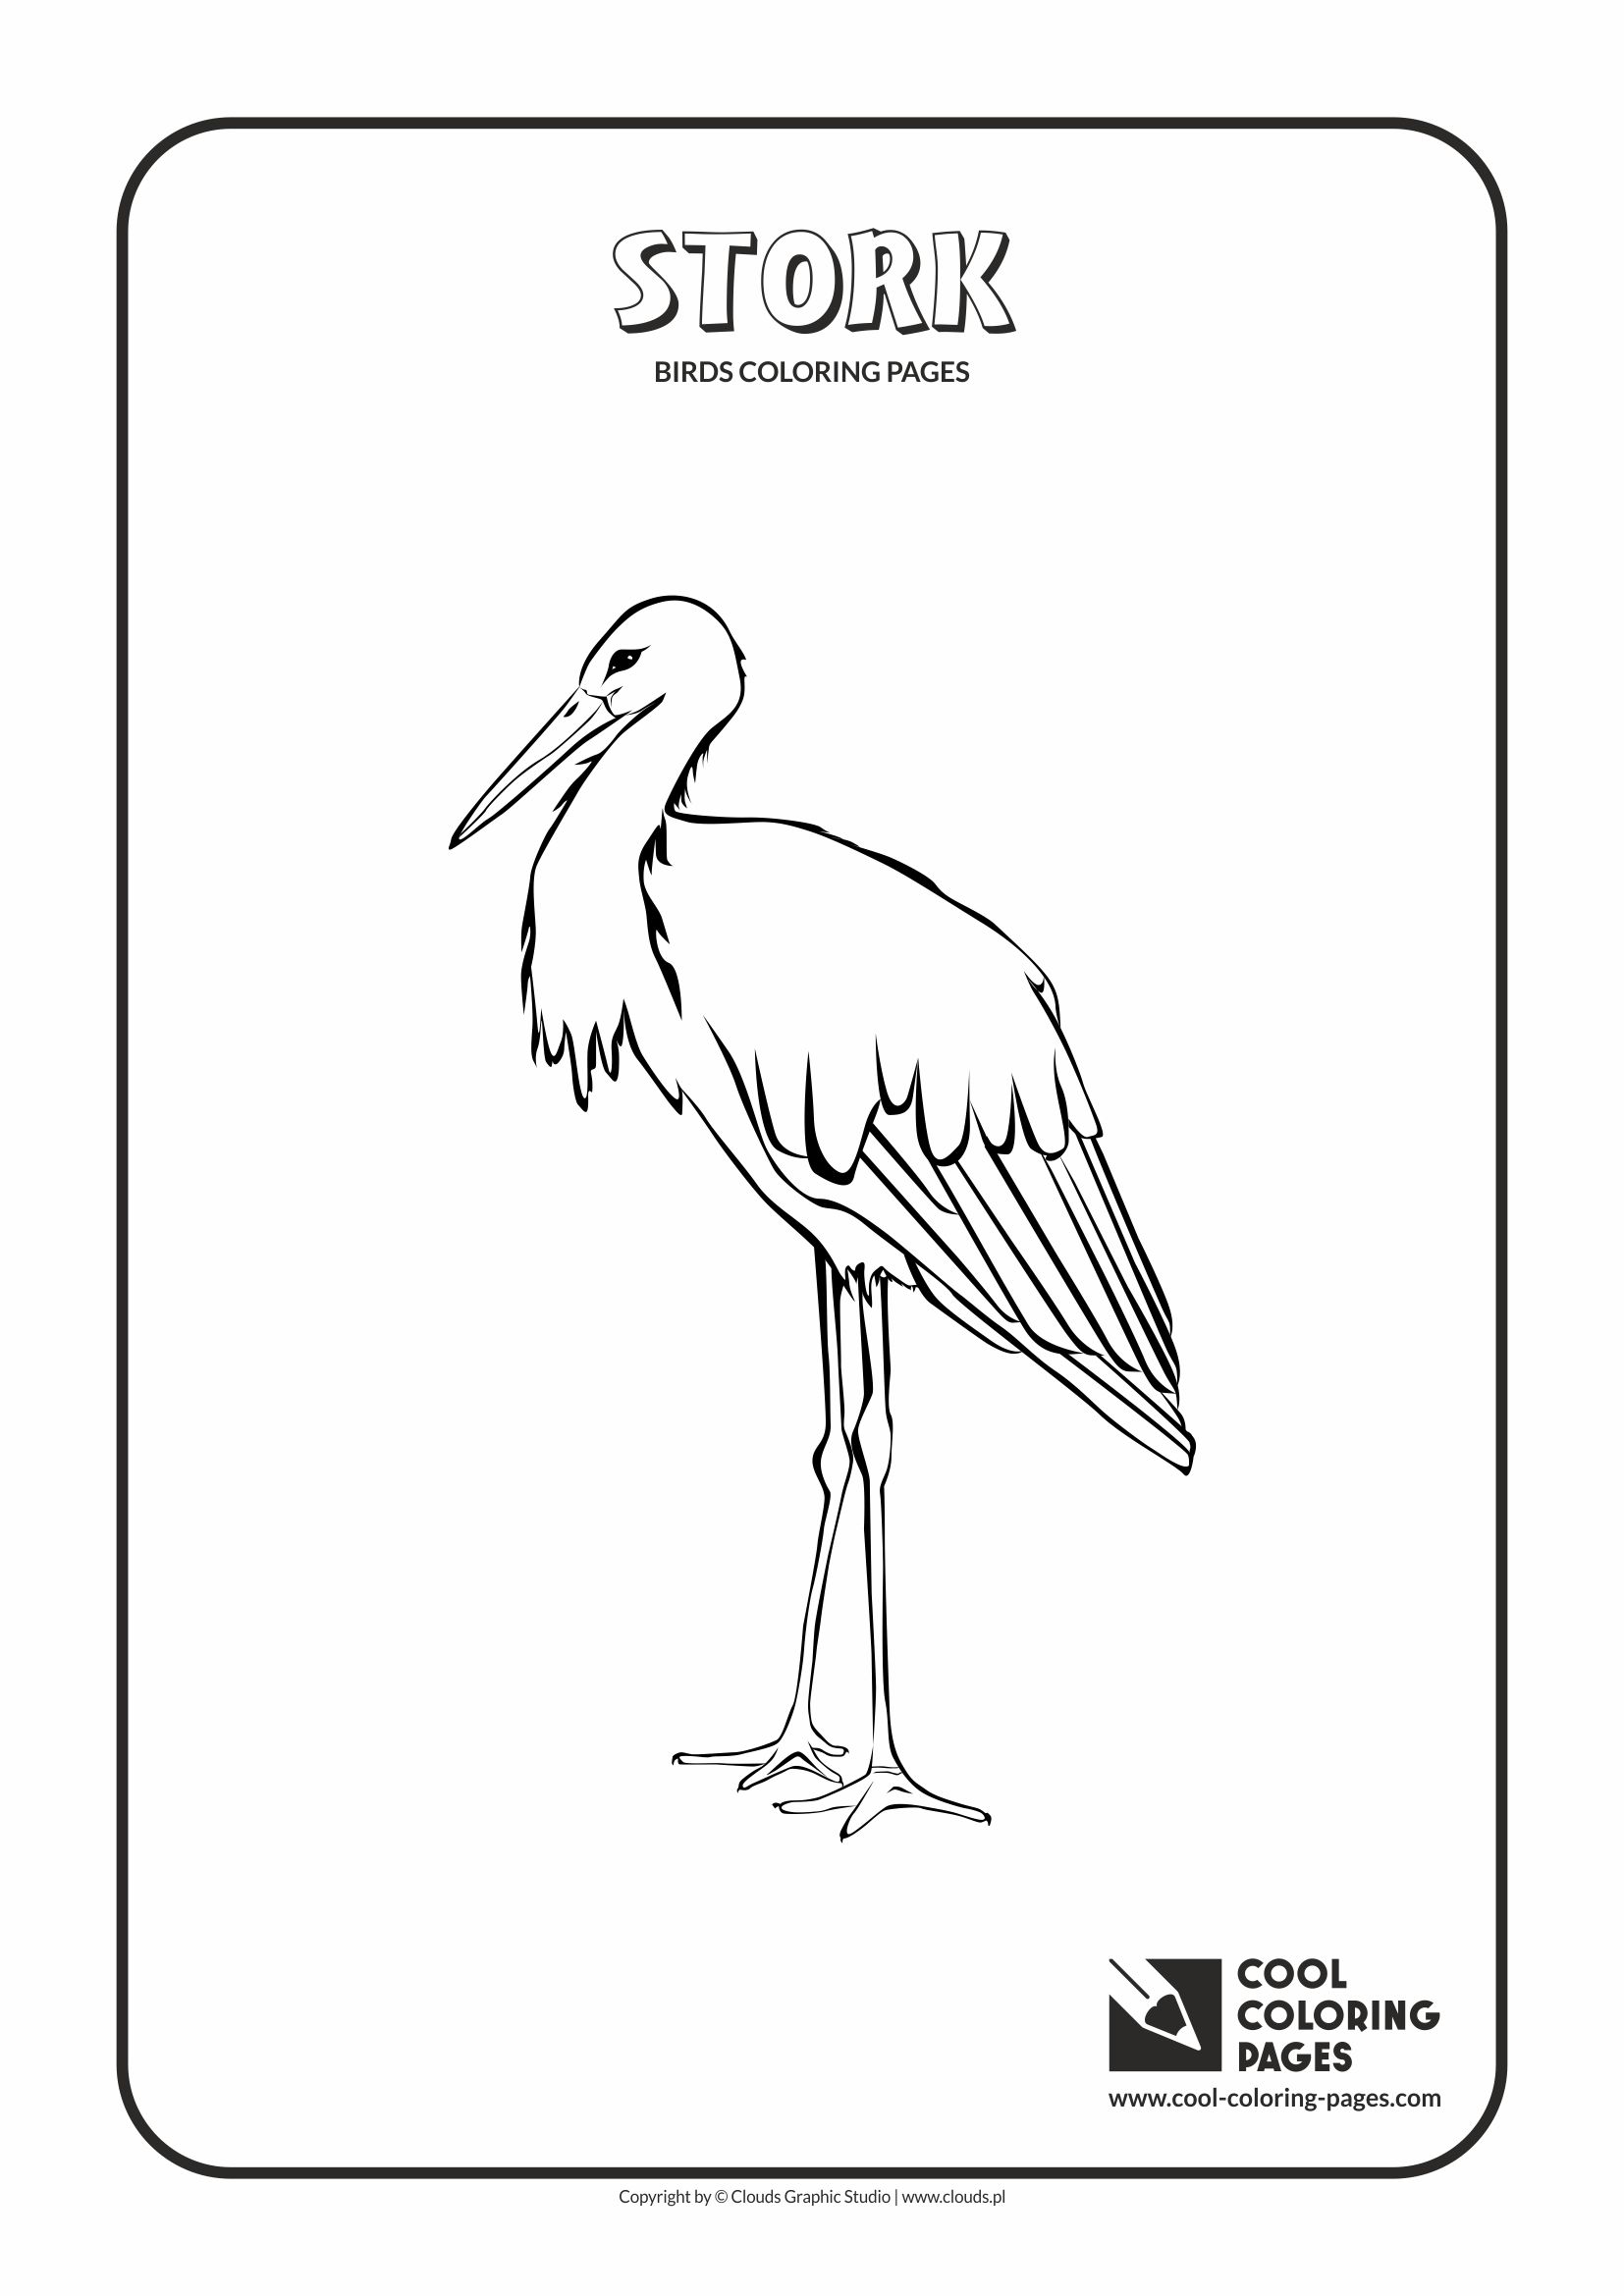 Cool Coloring Pages Stork coloring page ...cool-coloring-pages.com